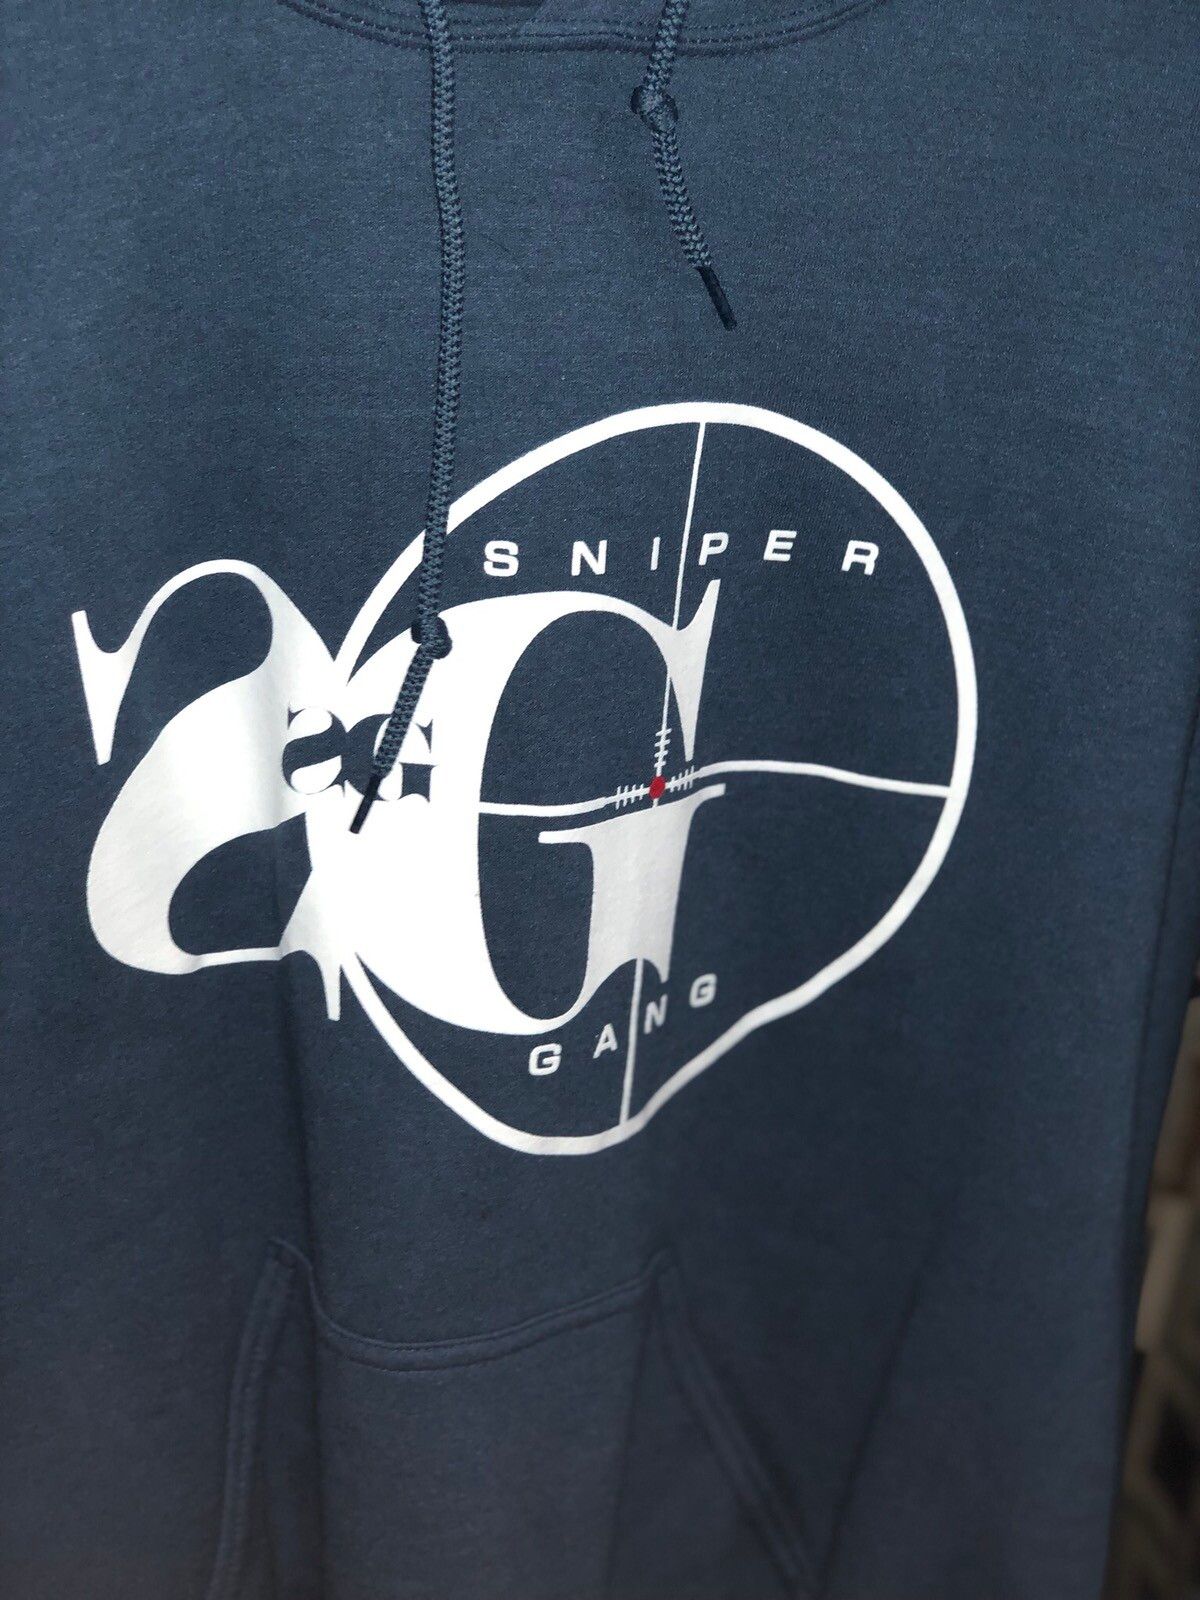 Sniper Gang Hoodie Size US M / EU 48-50 / 2 - 1 Preview